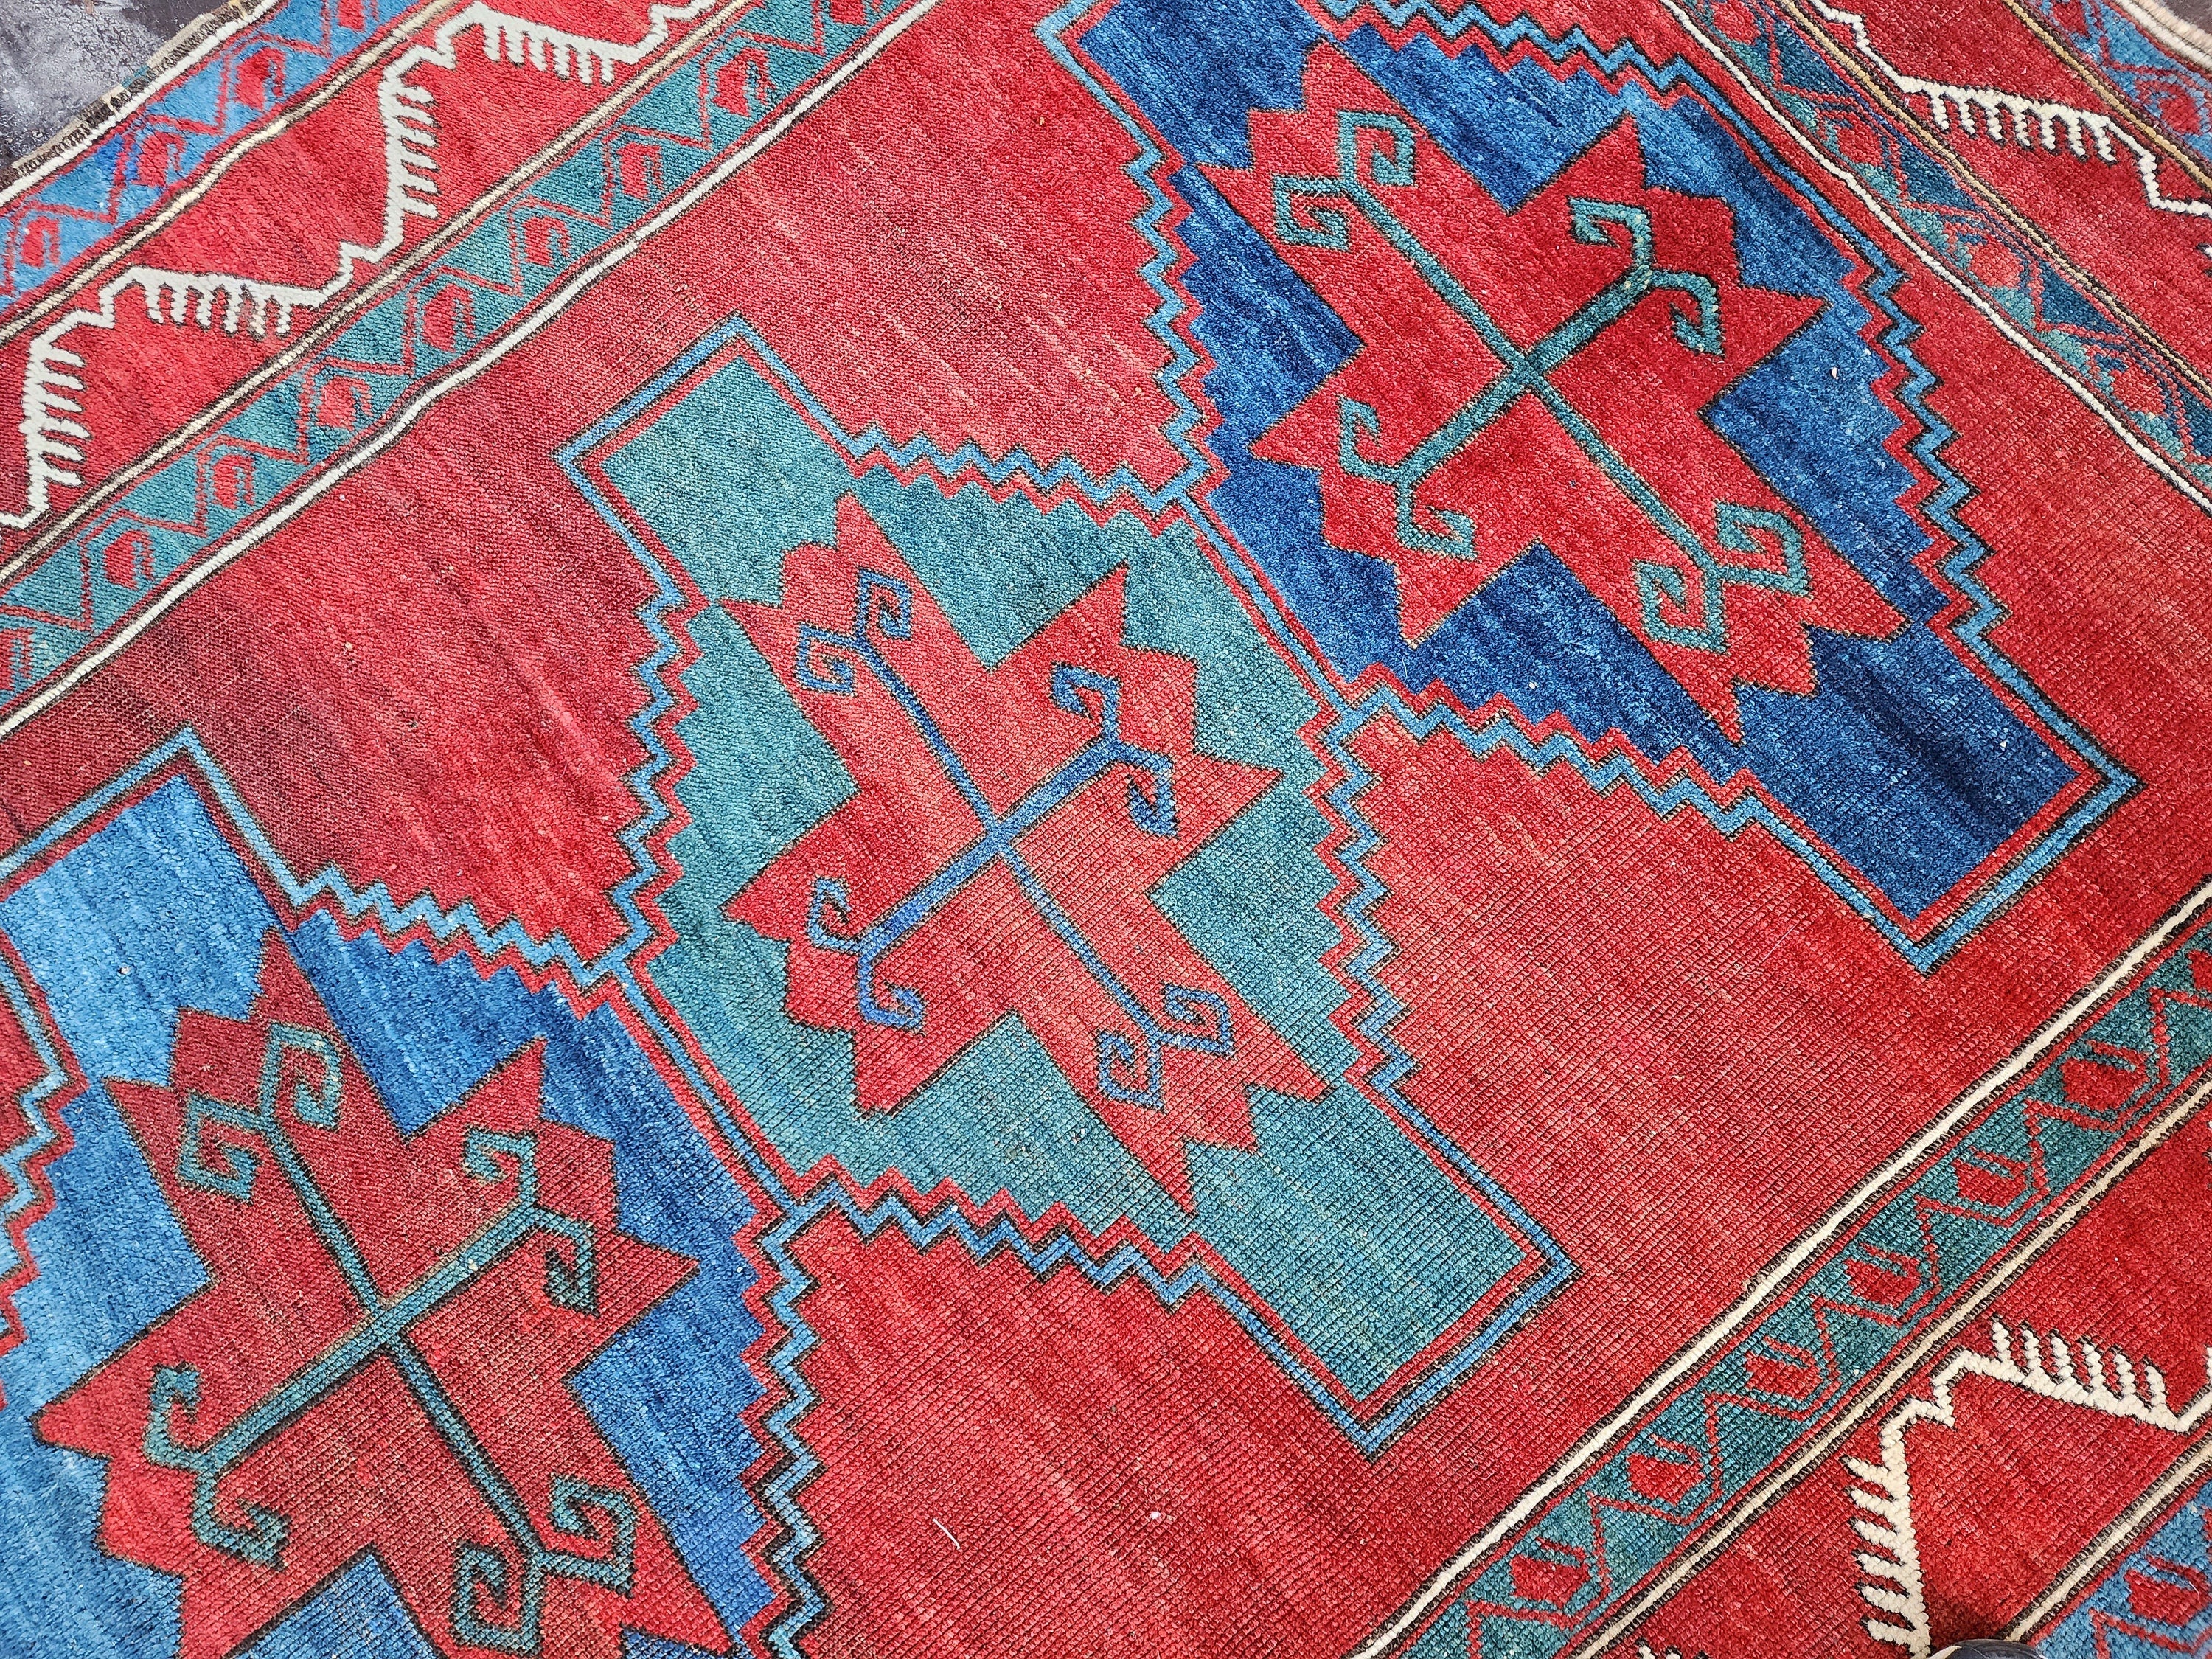 Antique Caucasian Fahrola Rug 6 x 4 ft, Red Blue and Green Tribal Persian Area Rug